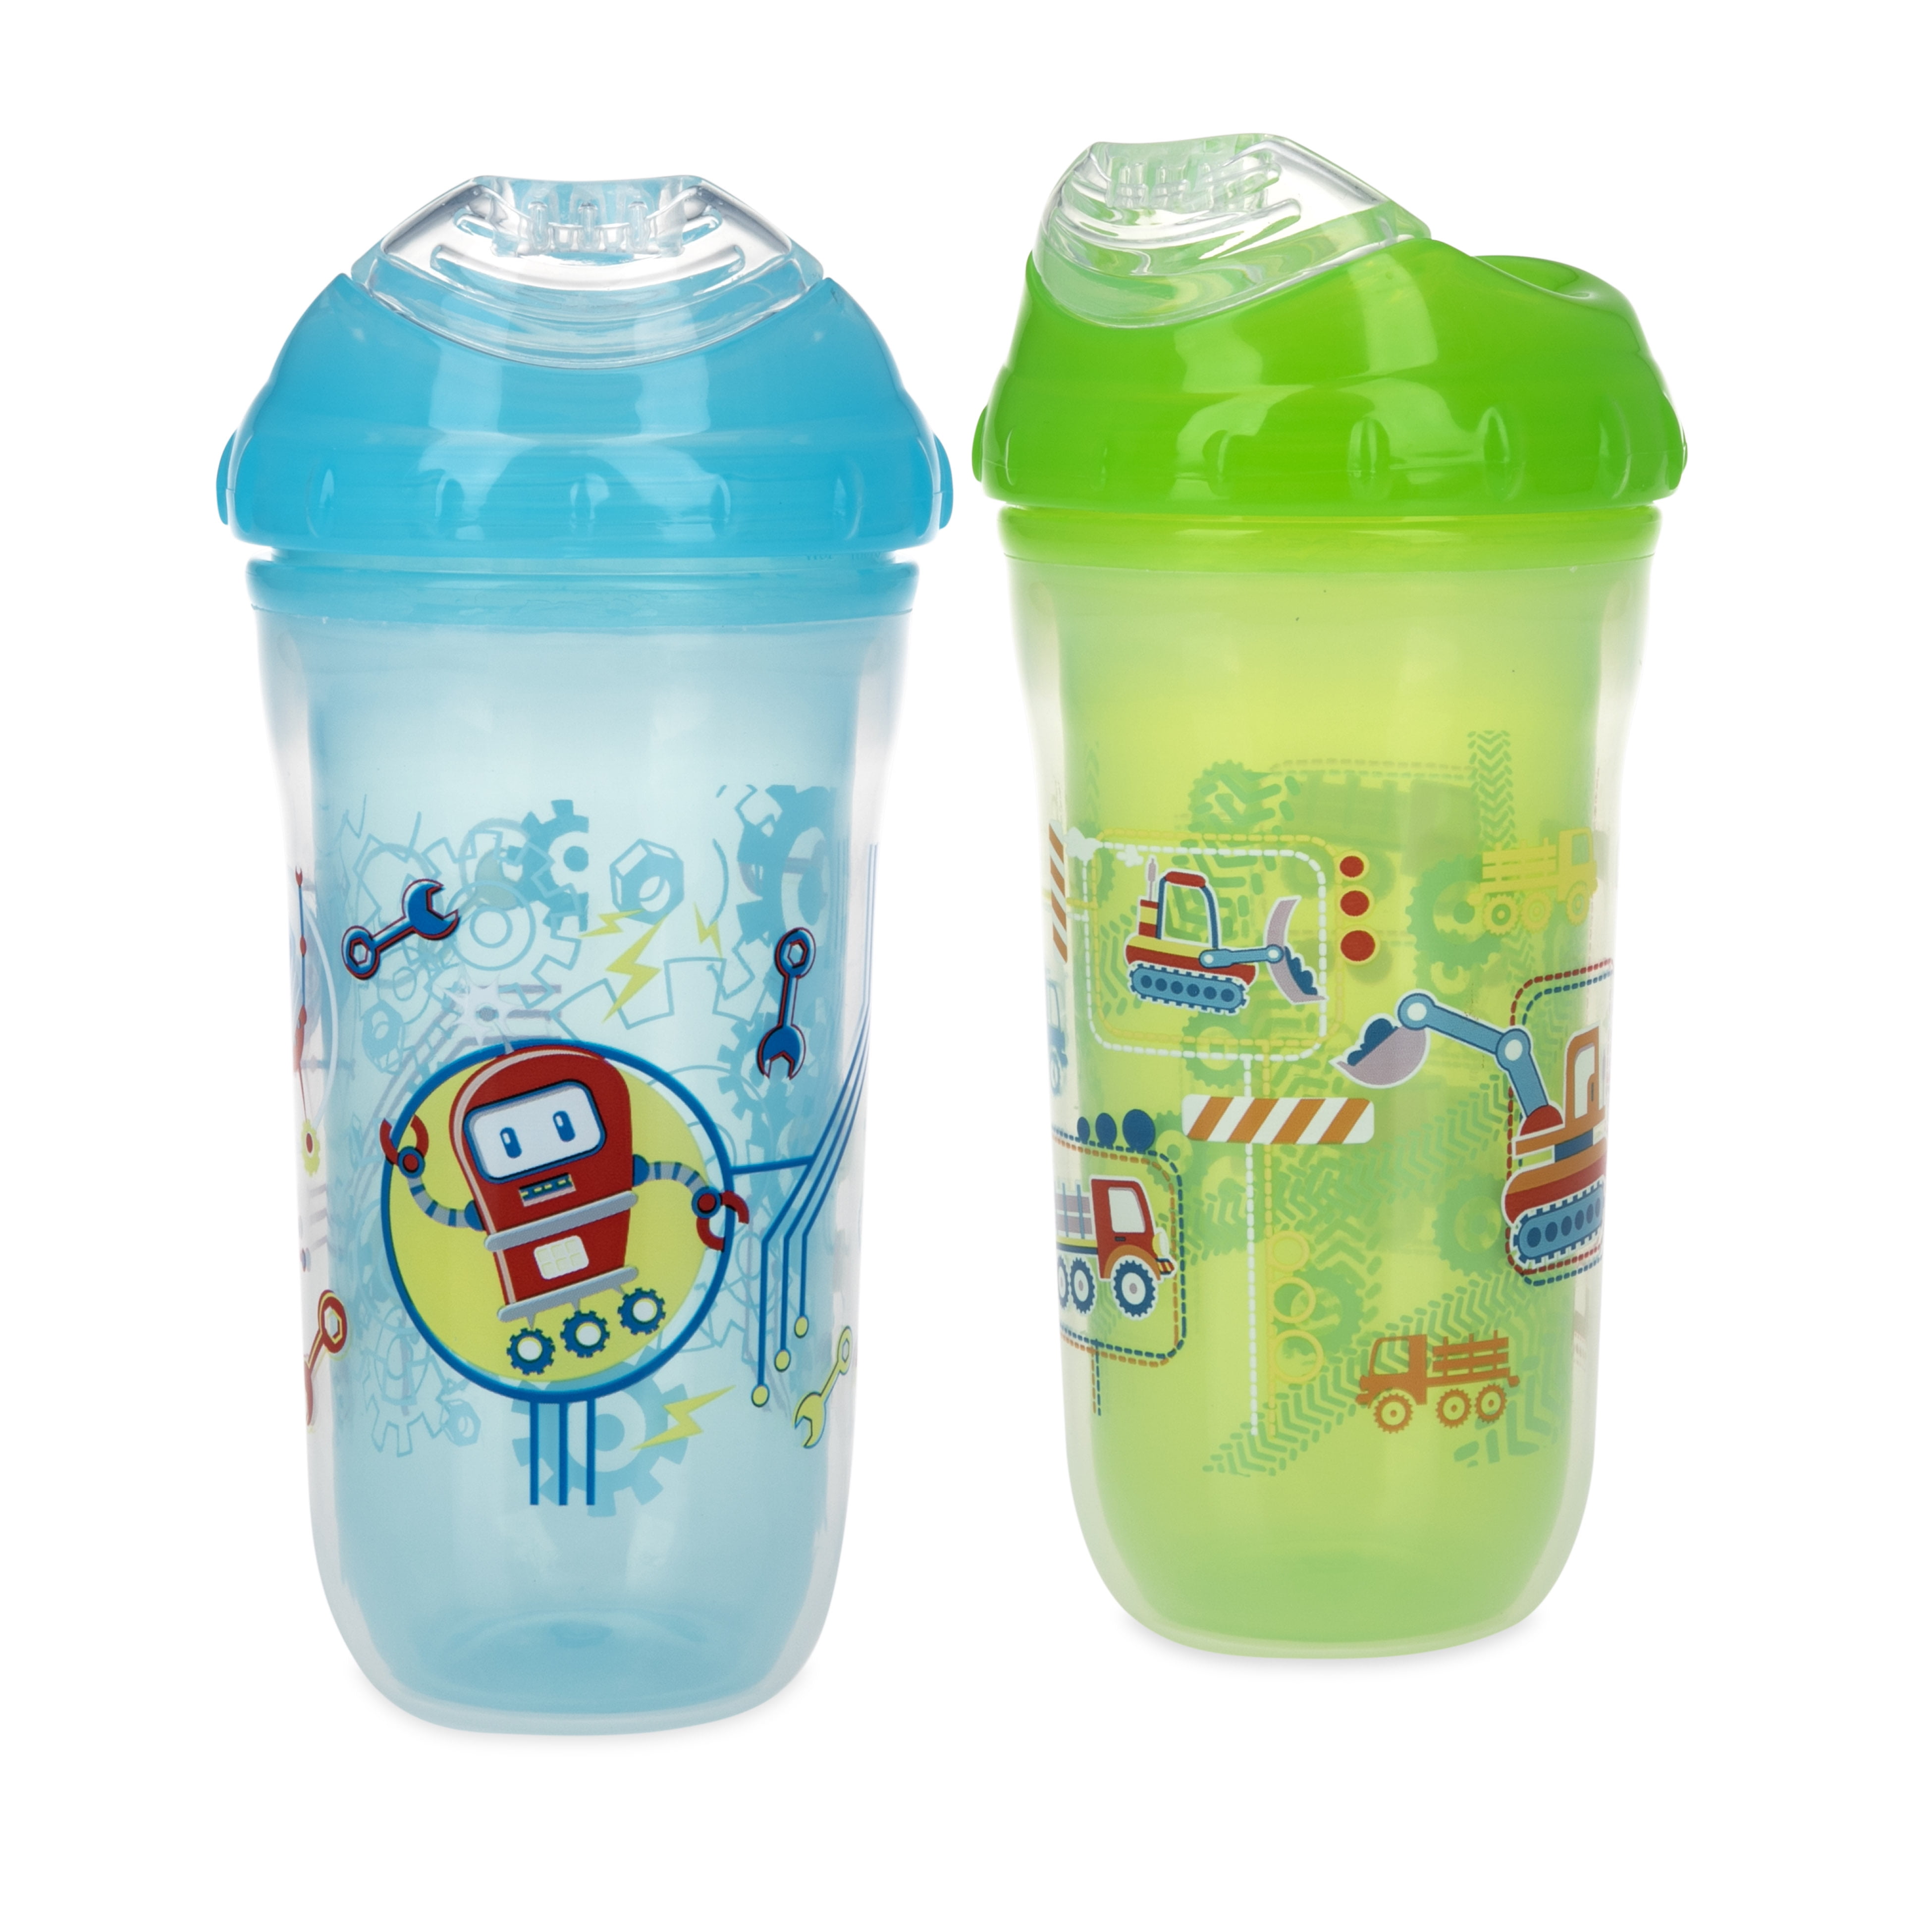 Nuby Insulated No-Spill Soft Sipper Sippy Cup 2-pack 9oz BPA Free Toddler/Baby 